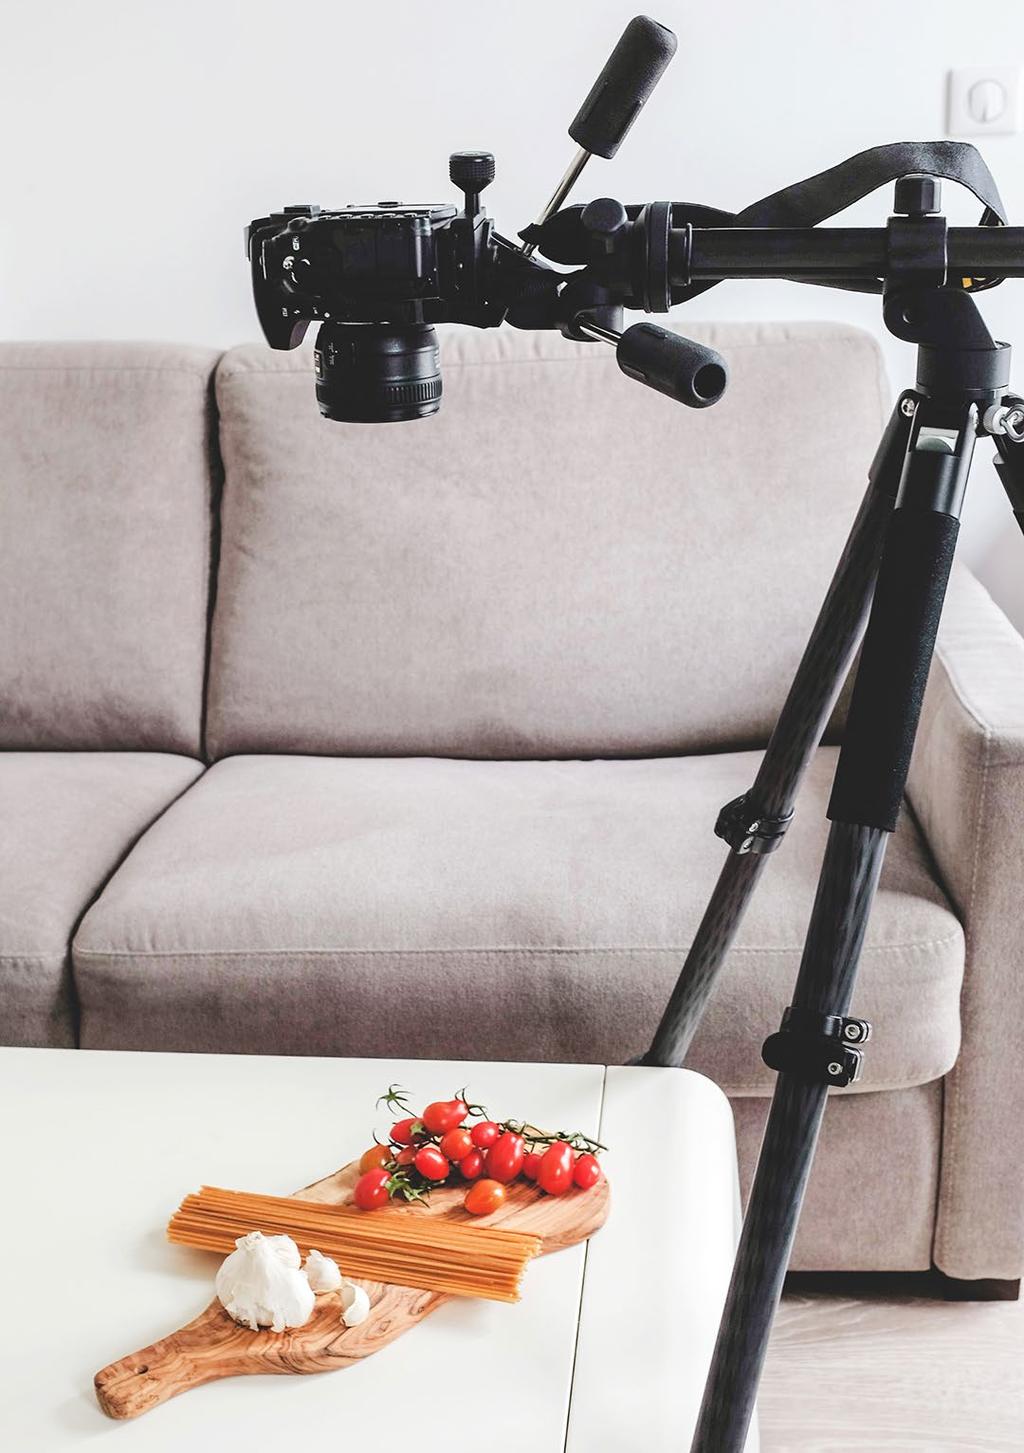 Benefits of a tripod with a lateral arm /side arm When shooting overhead, for example in food photography a tripod with a lateral arm / side arm you will not need to balance on a chair in order to